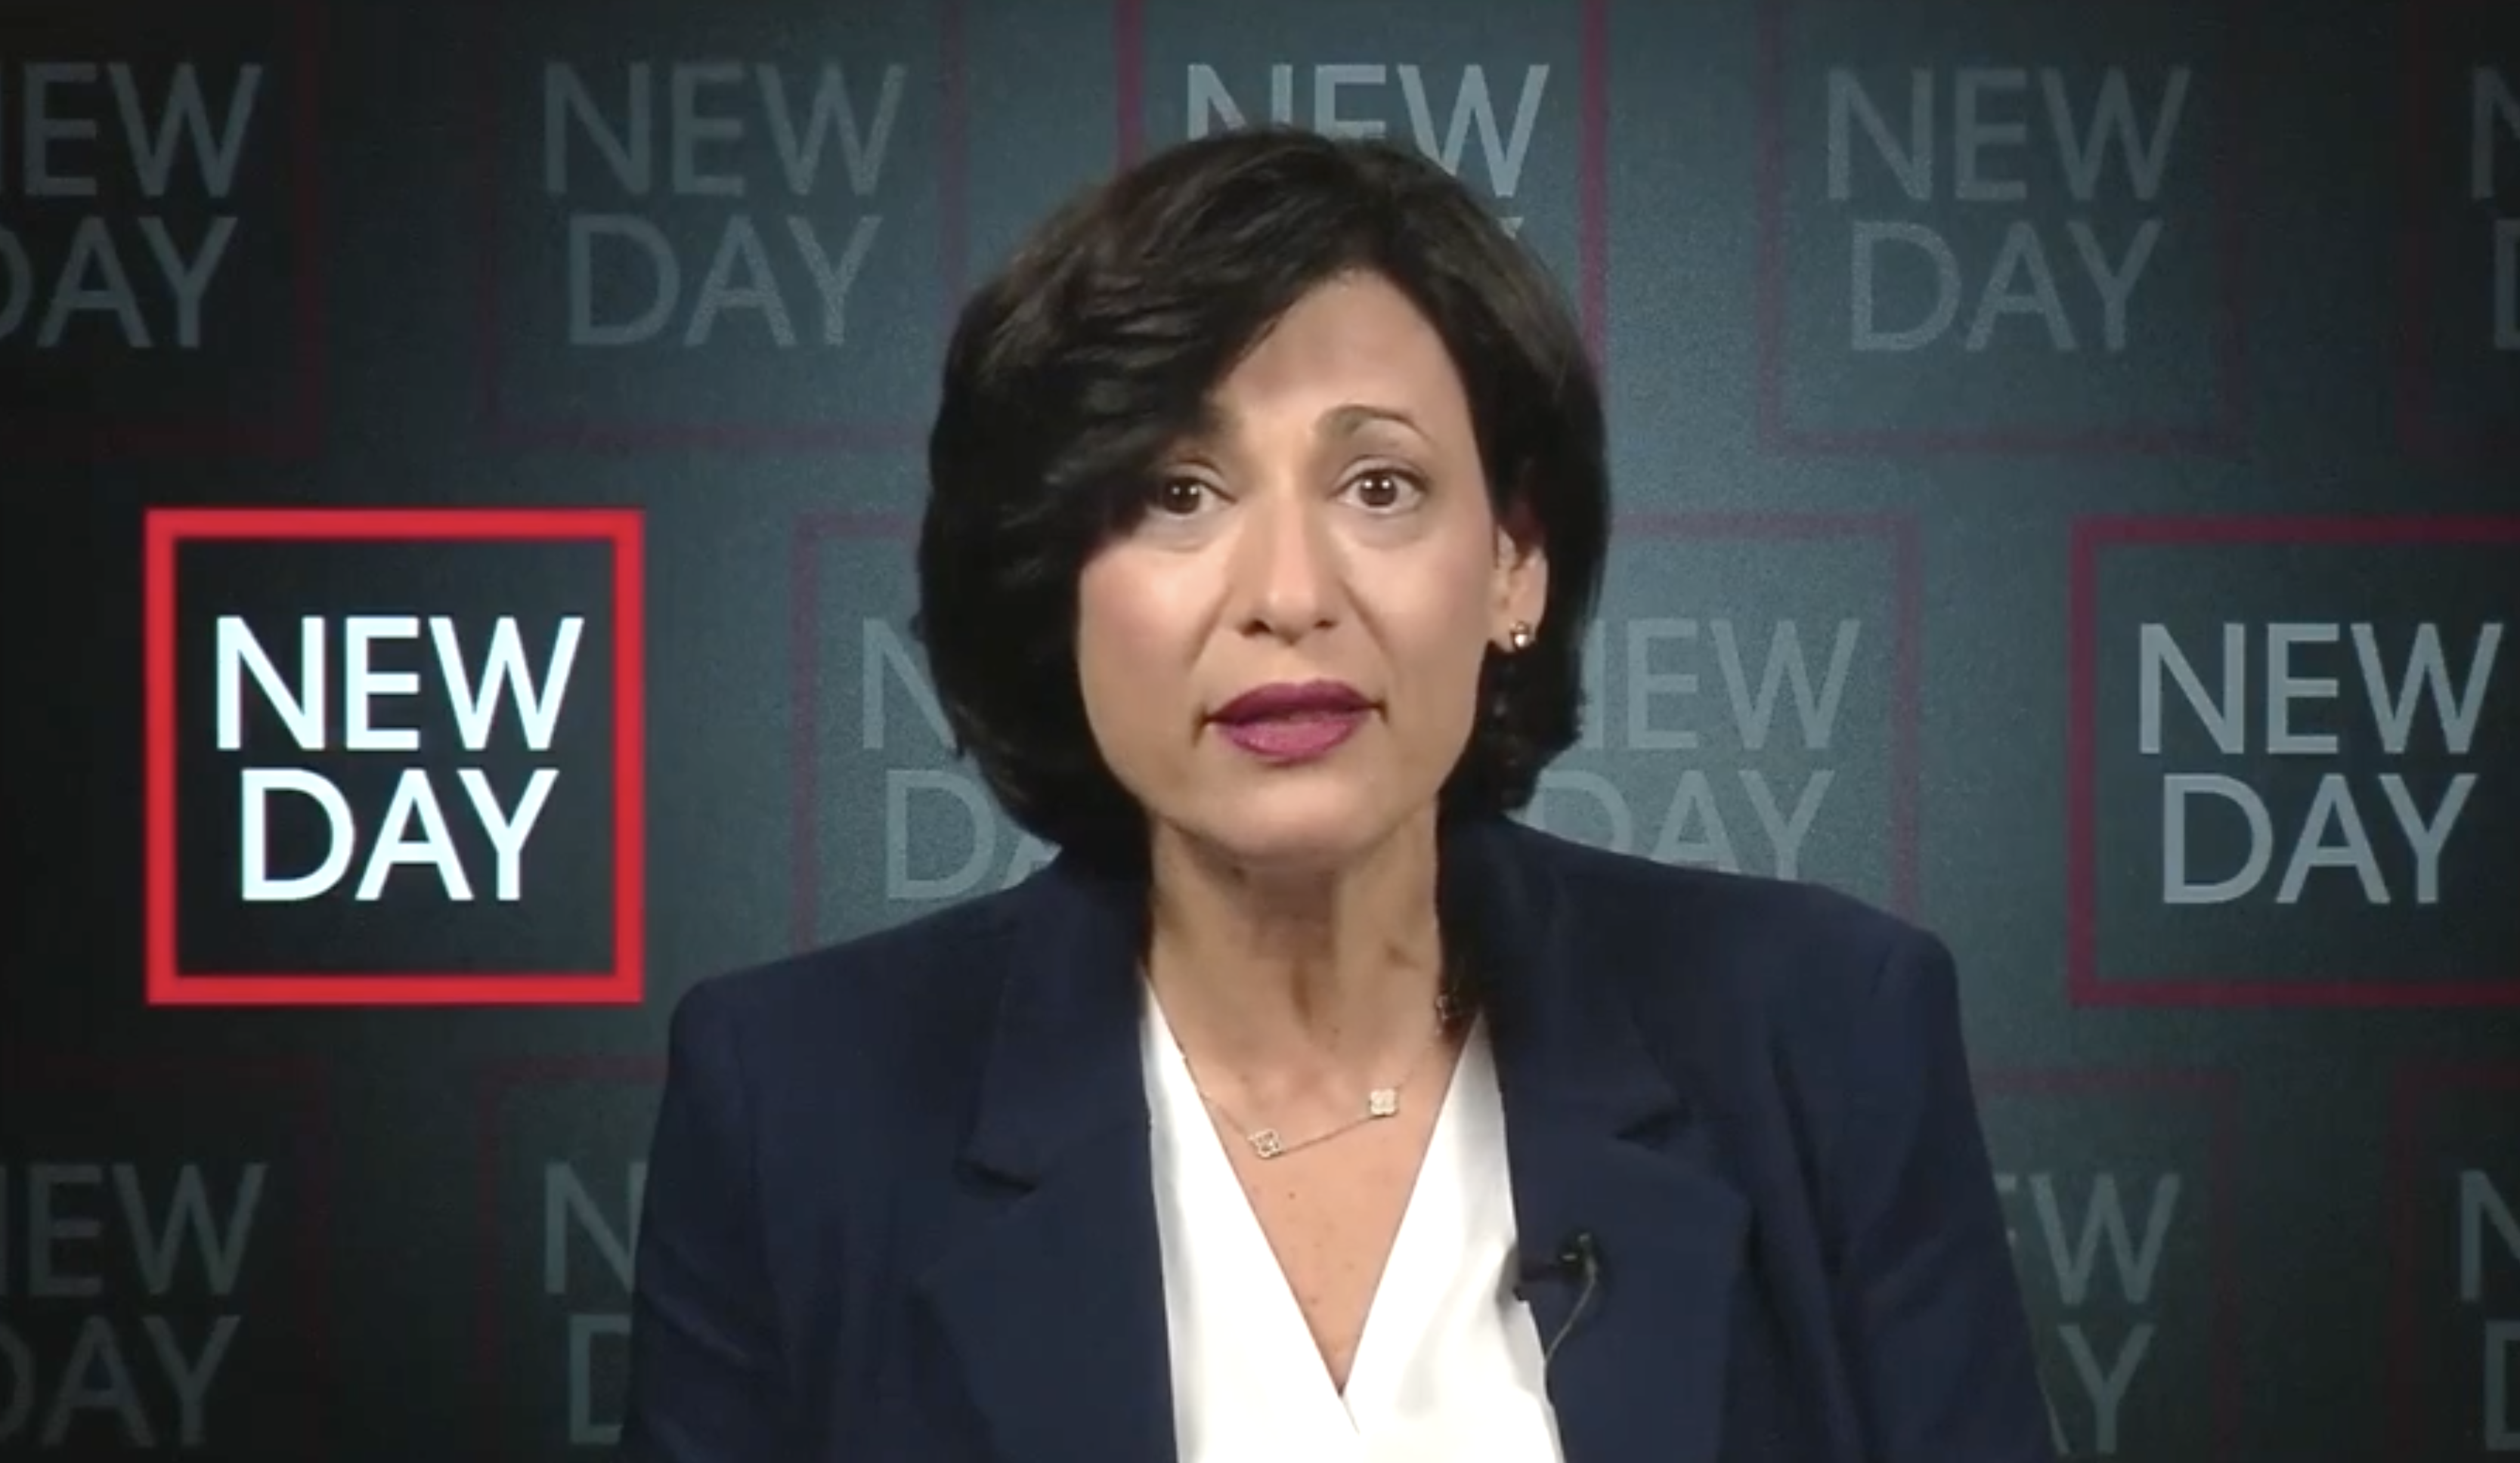 Dr. Rochelle Walensky, director of the US Centers for Disease Control and Prevention, speaks to CNN’s New Day on 29 December 2021